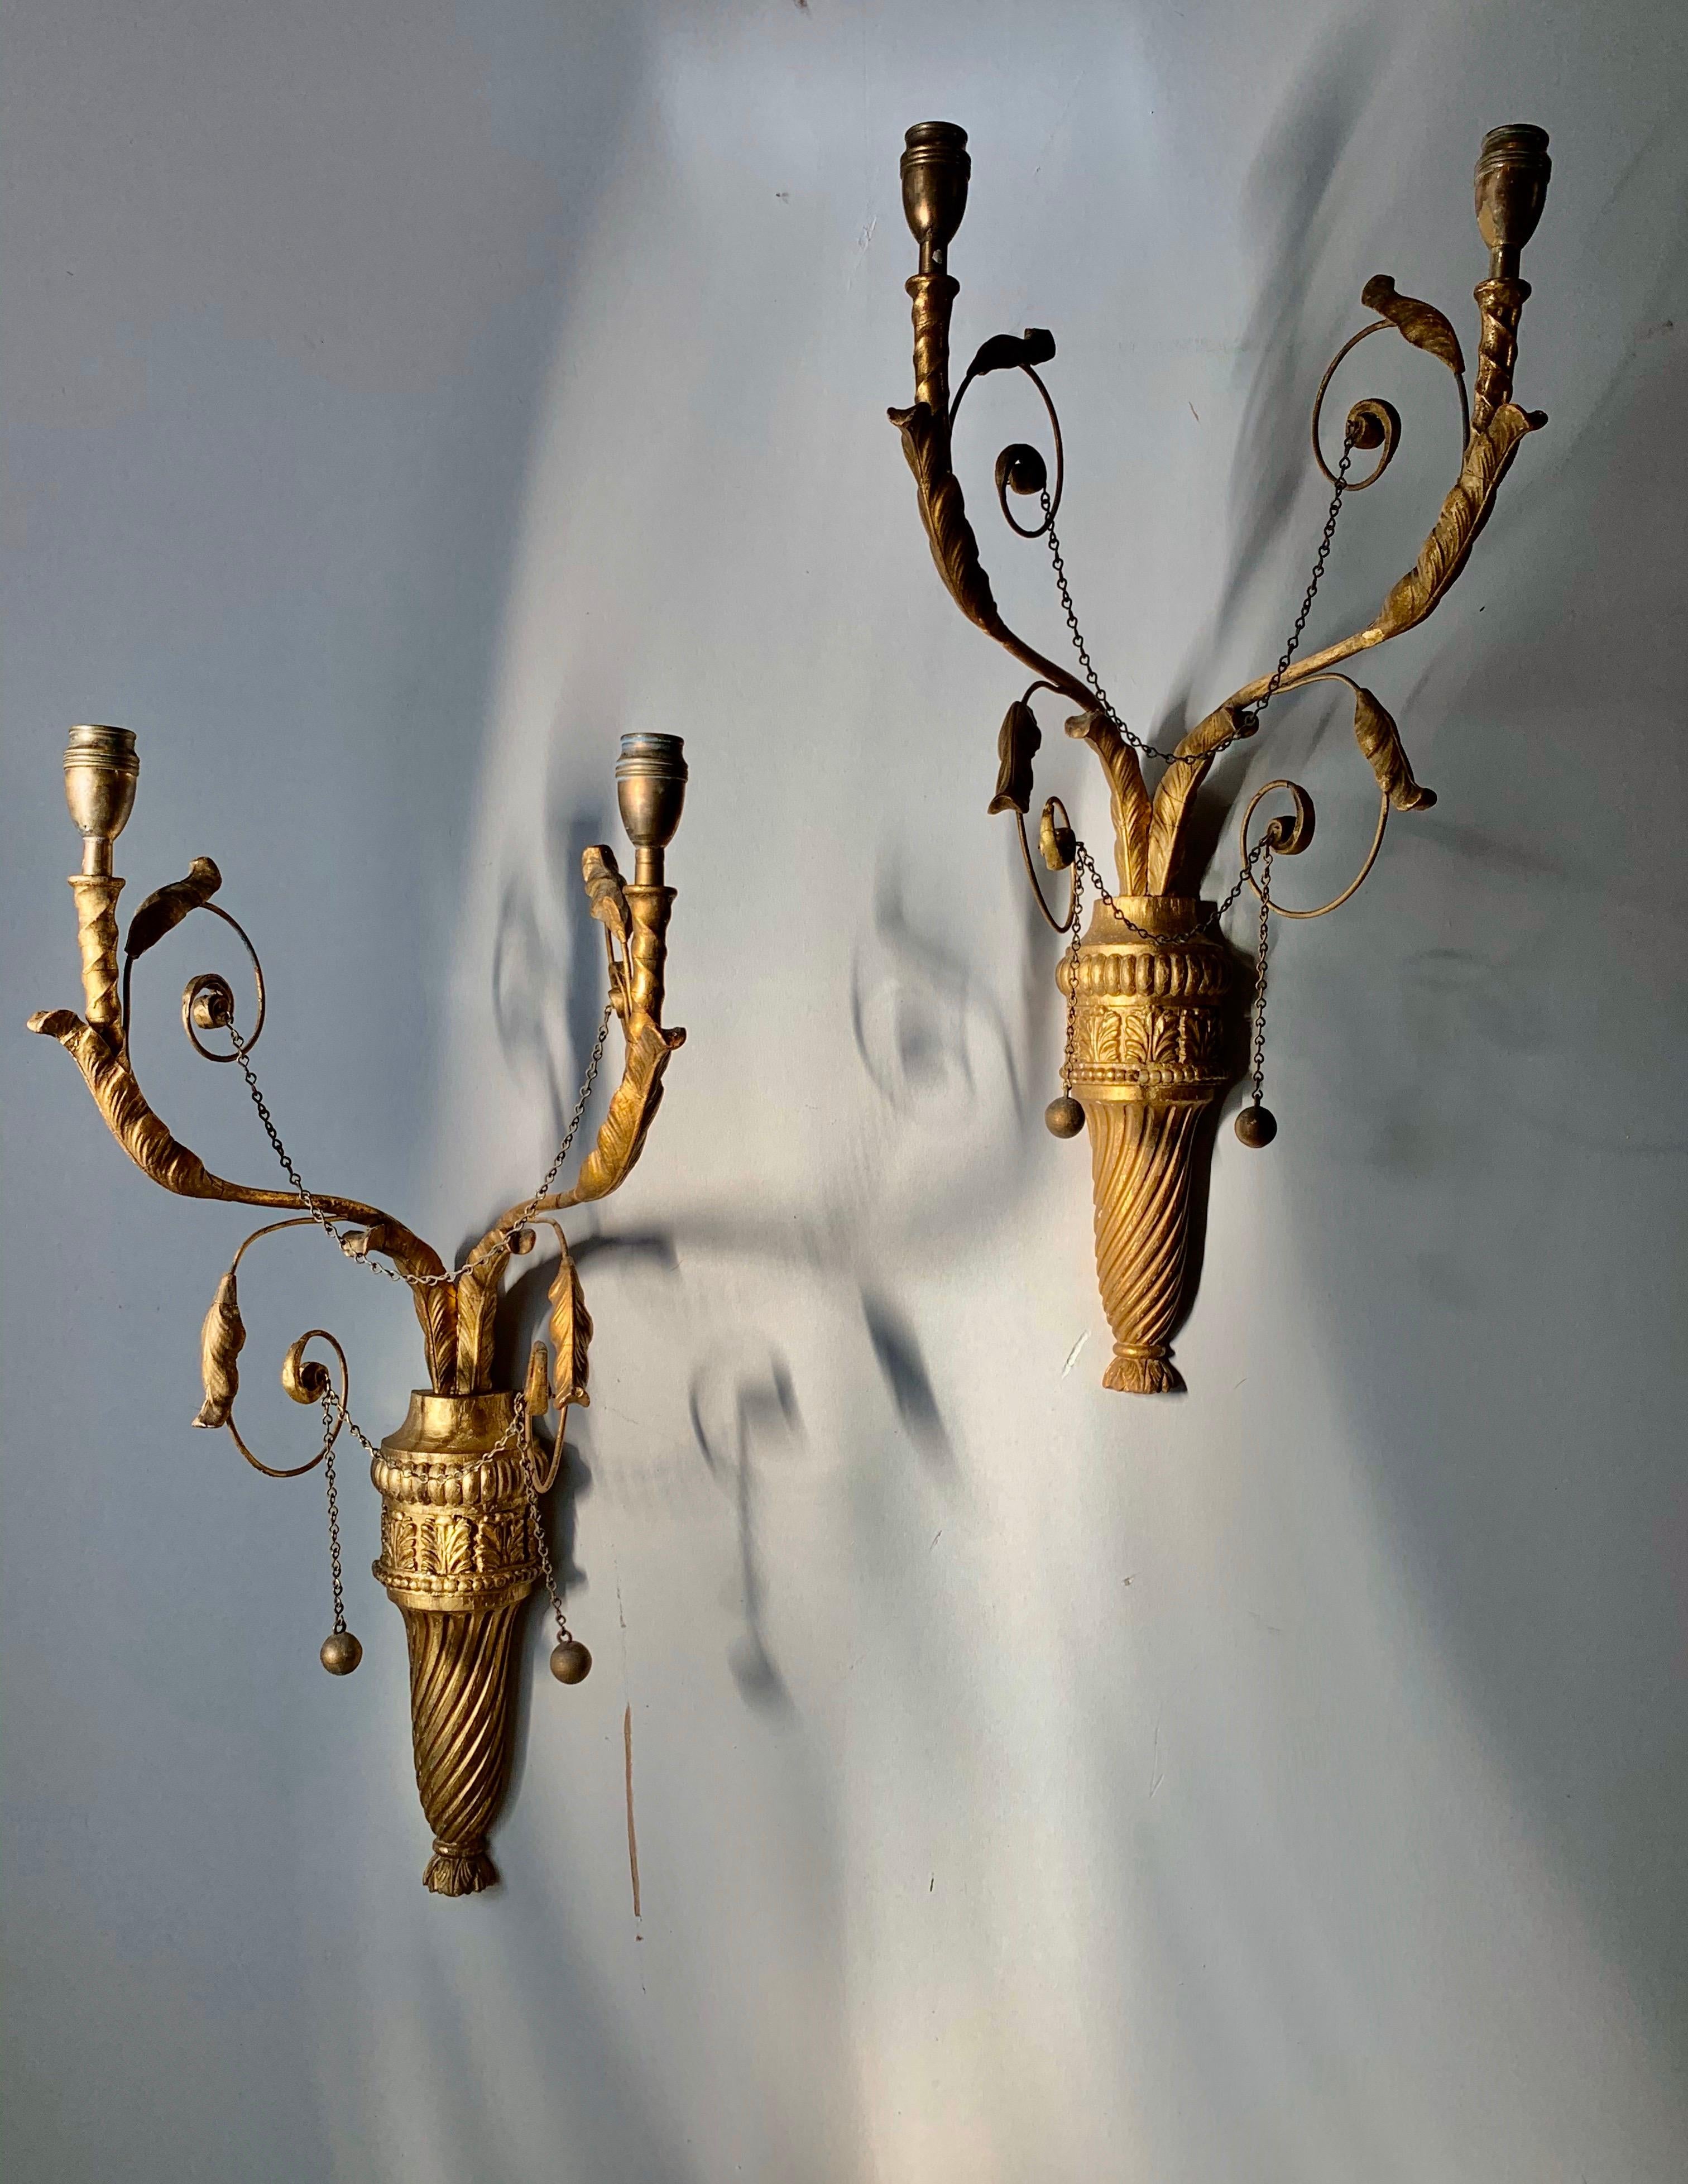 Pair of delicate 19th century English, Adams style neoclassical wall sconces
Two foliate adorned arms rise from the hand carved reeded giltwood urns.